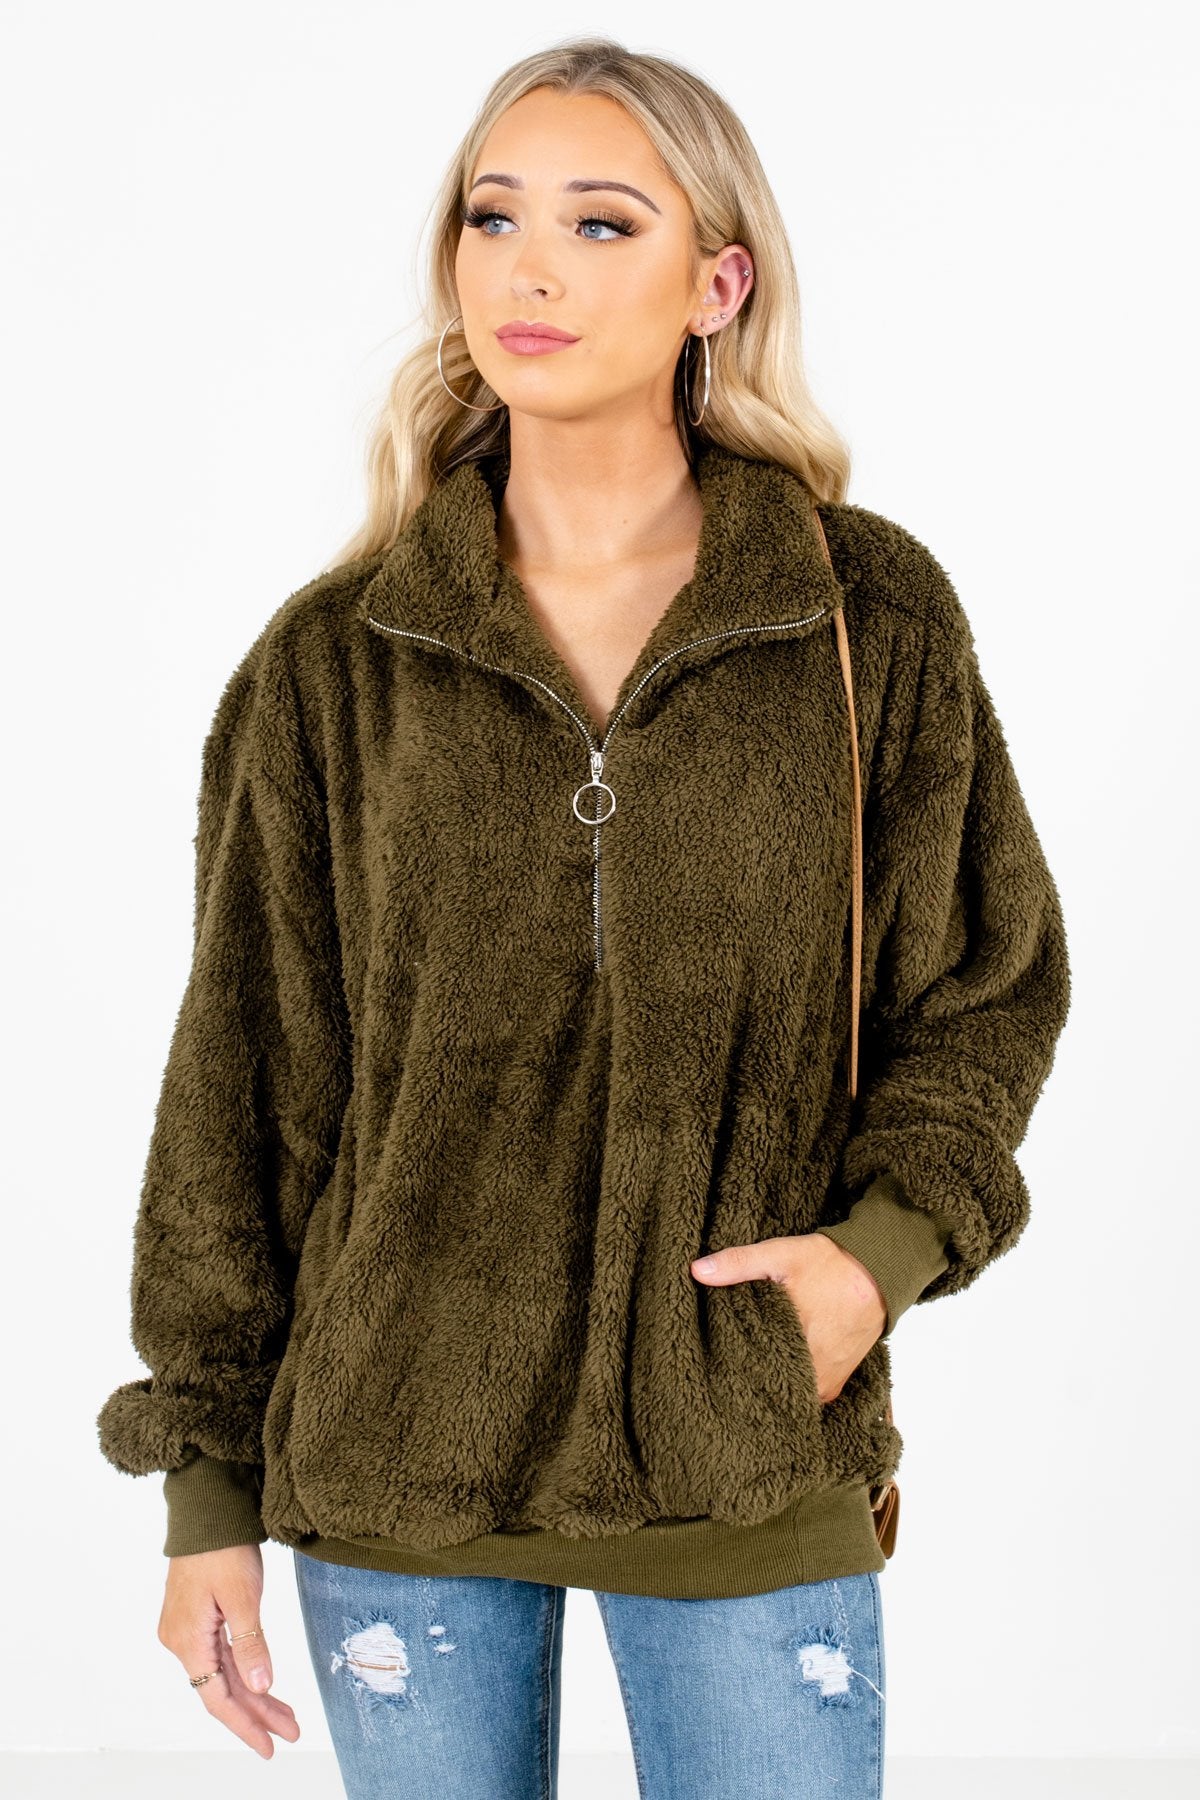 Olive Green High-Quality Fuzzy Material Boutique Pullovers for Women